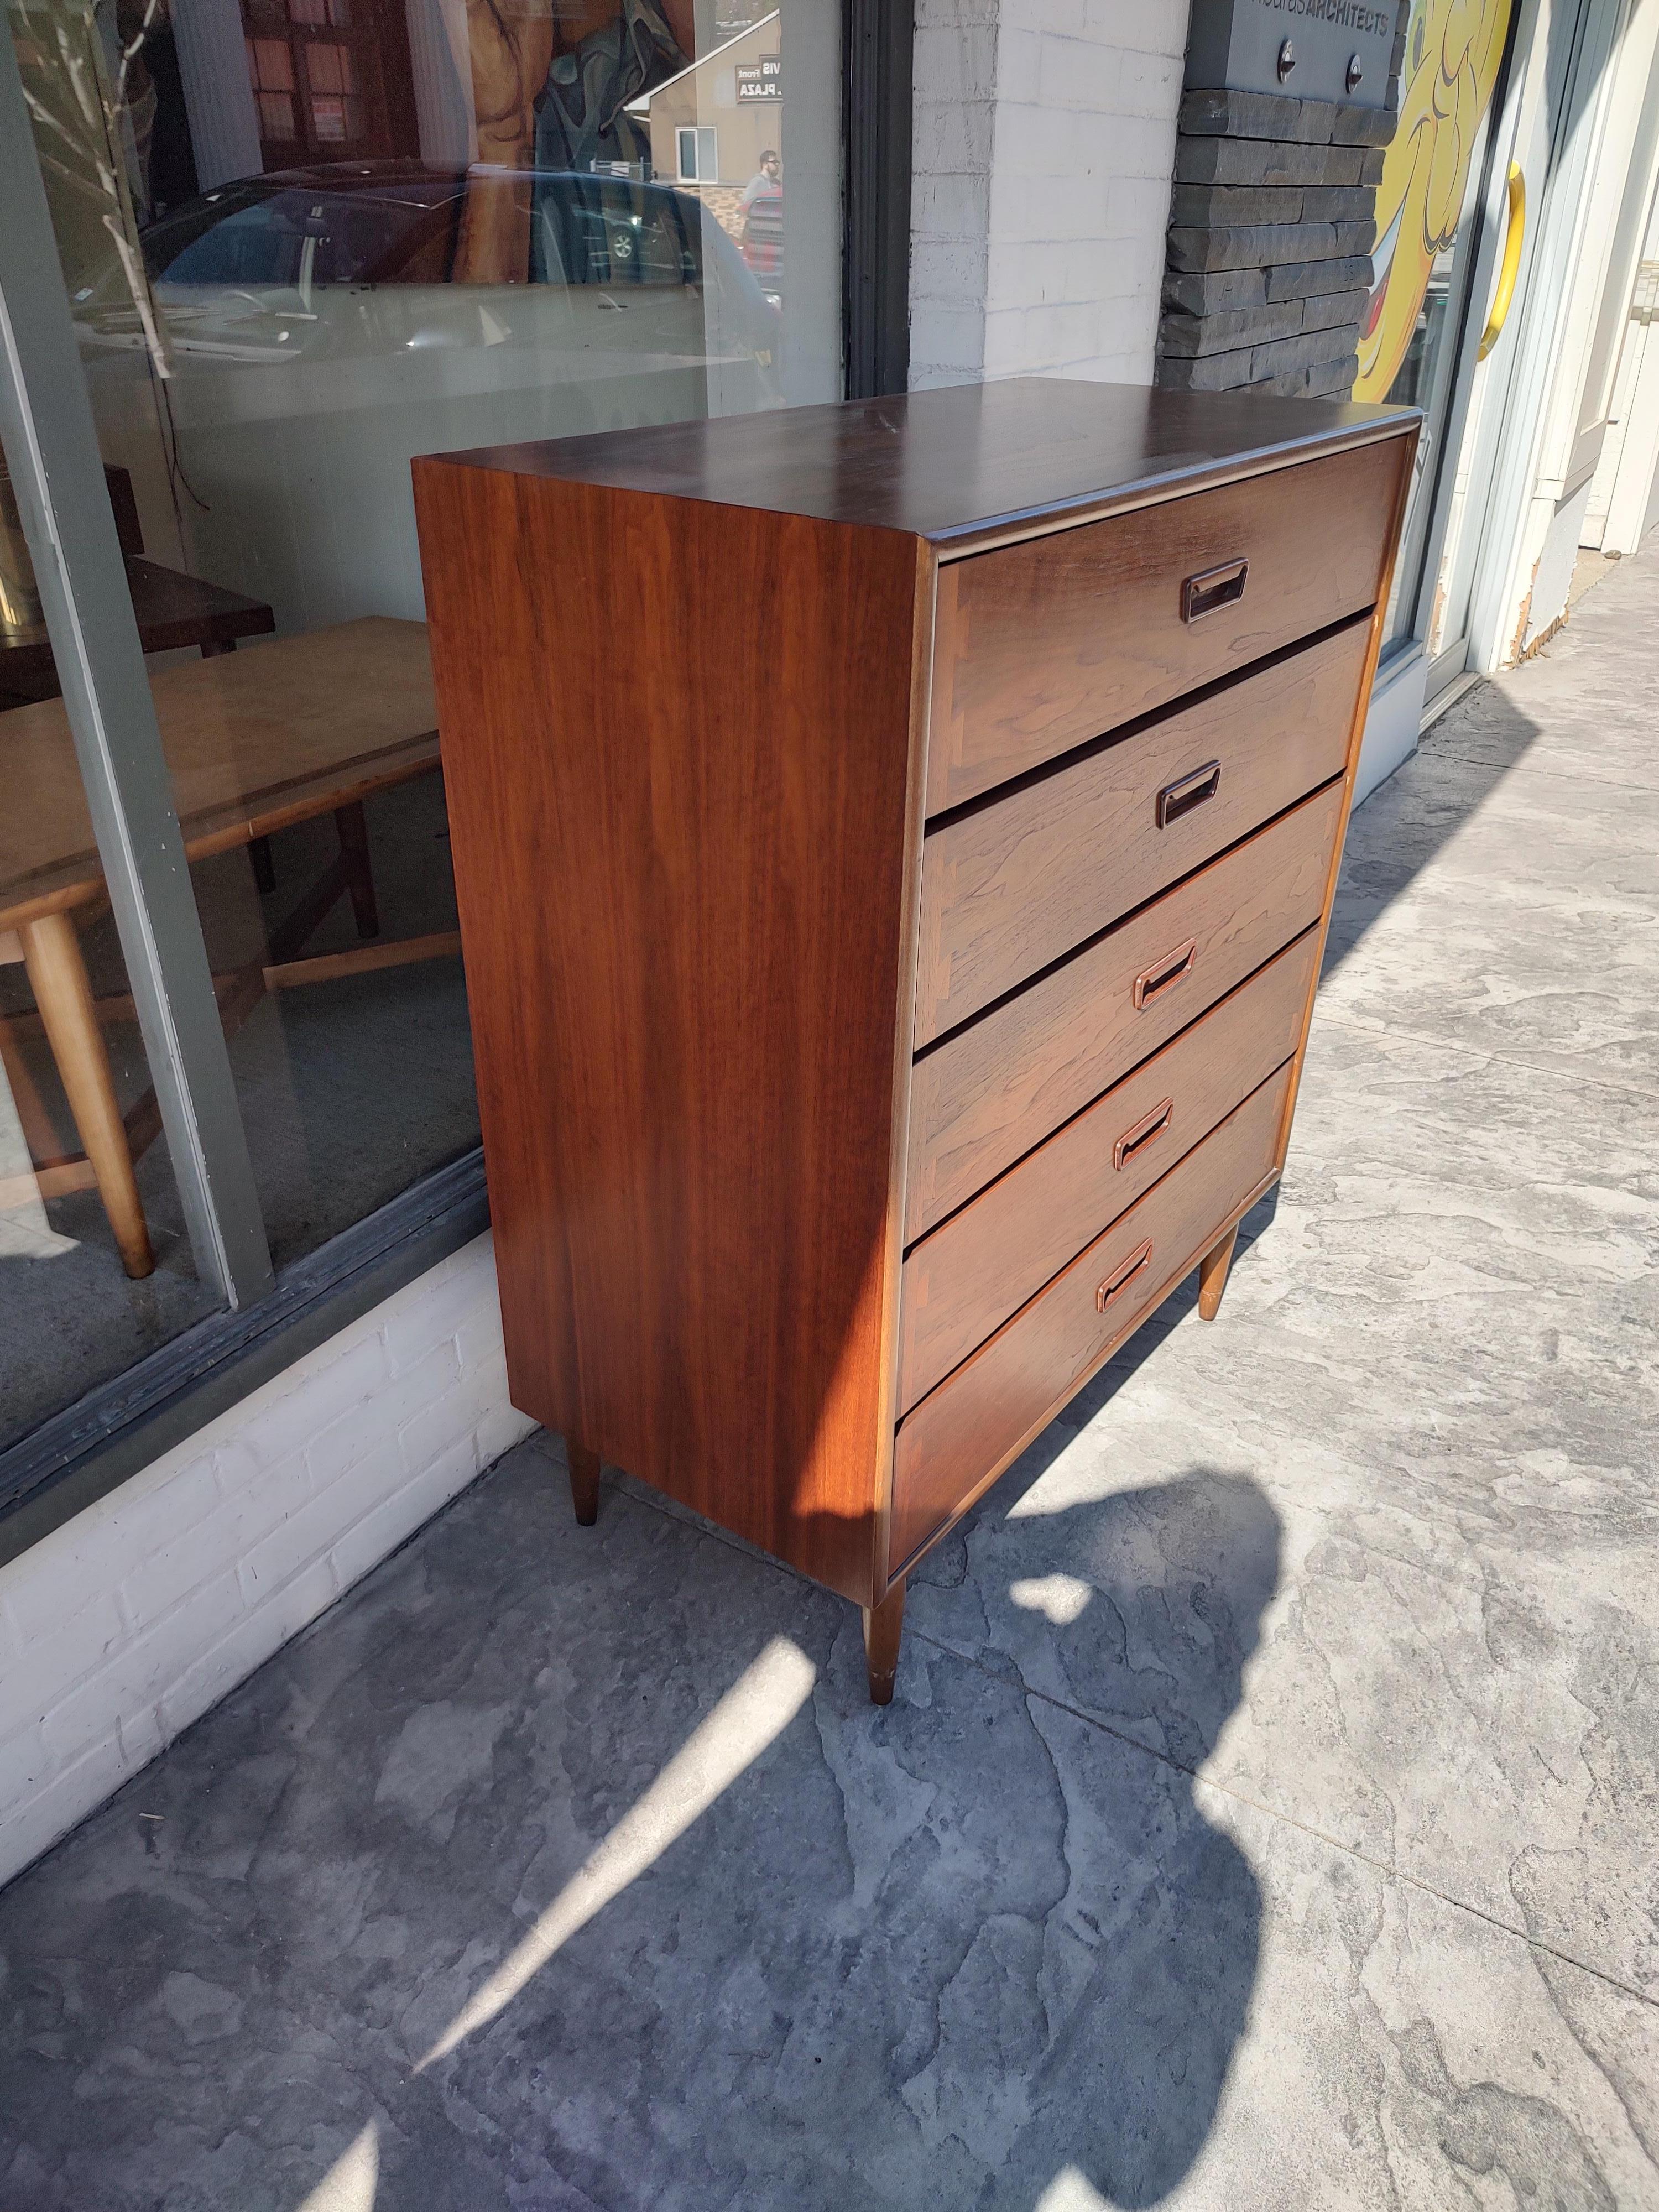 Fabulous and all original, even has the original tag brochure stapled to the inside of the top drawer. In excellent vintage condition with minimal wear. 5 drawer dresser designed by Andre Bus is a rare find and even rarer in original finish. The